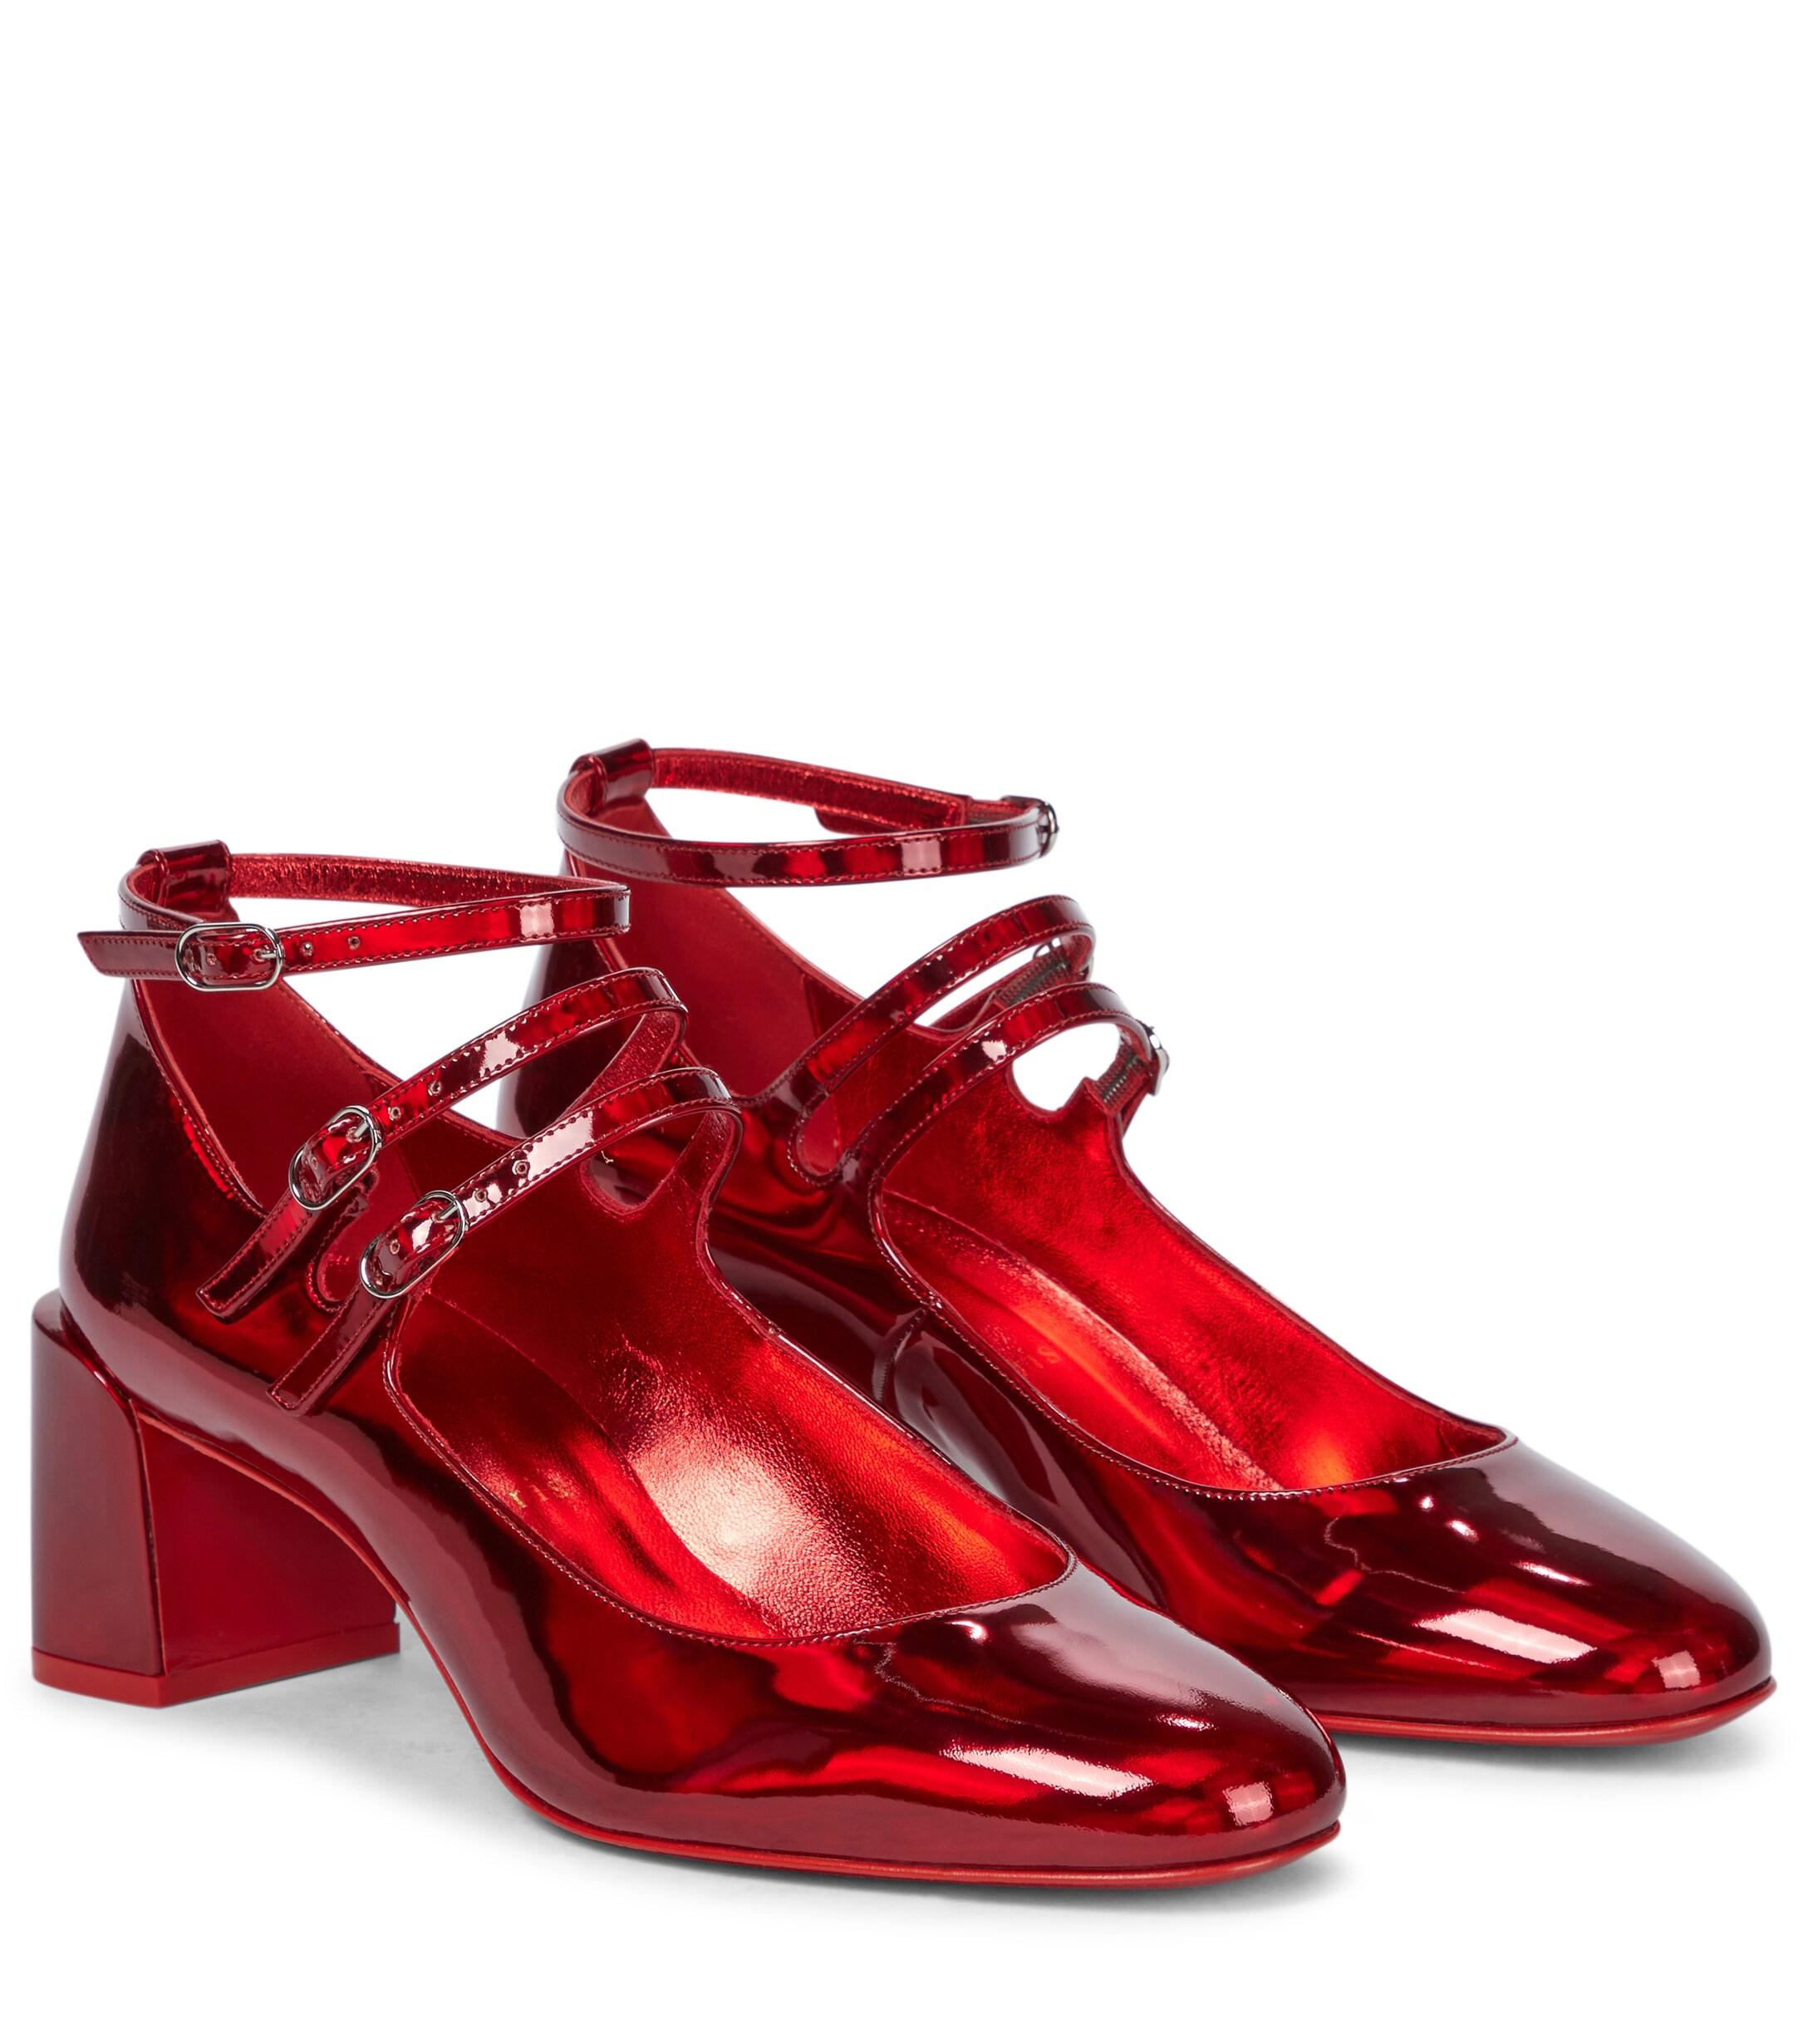 Christian Louboutin Vernica 55 Leather Mary Jane Pumps in Red | Lyst